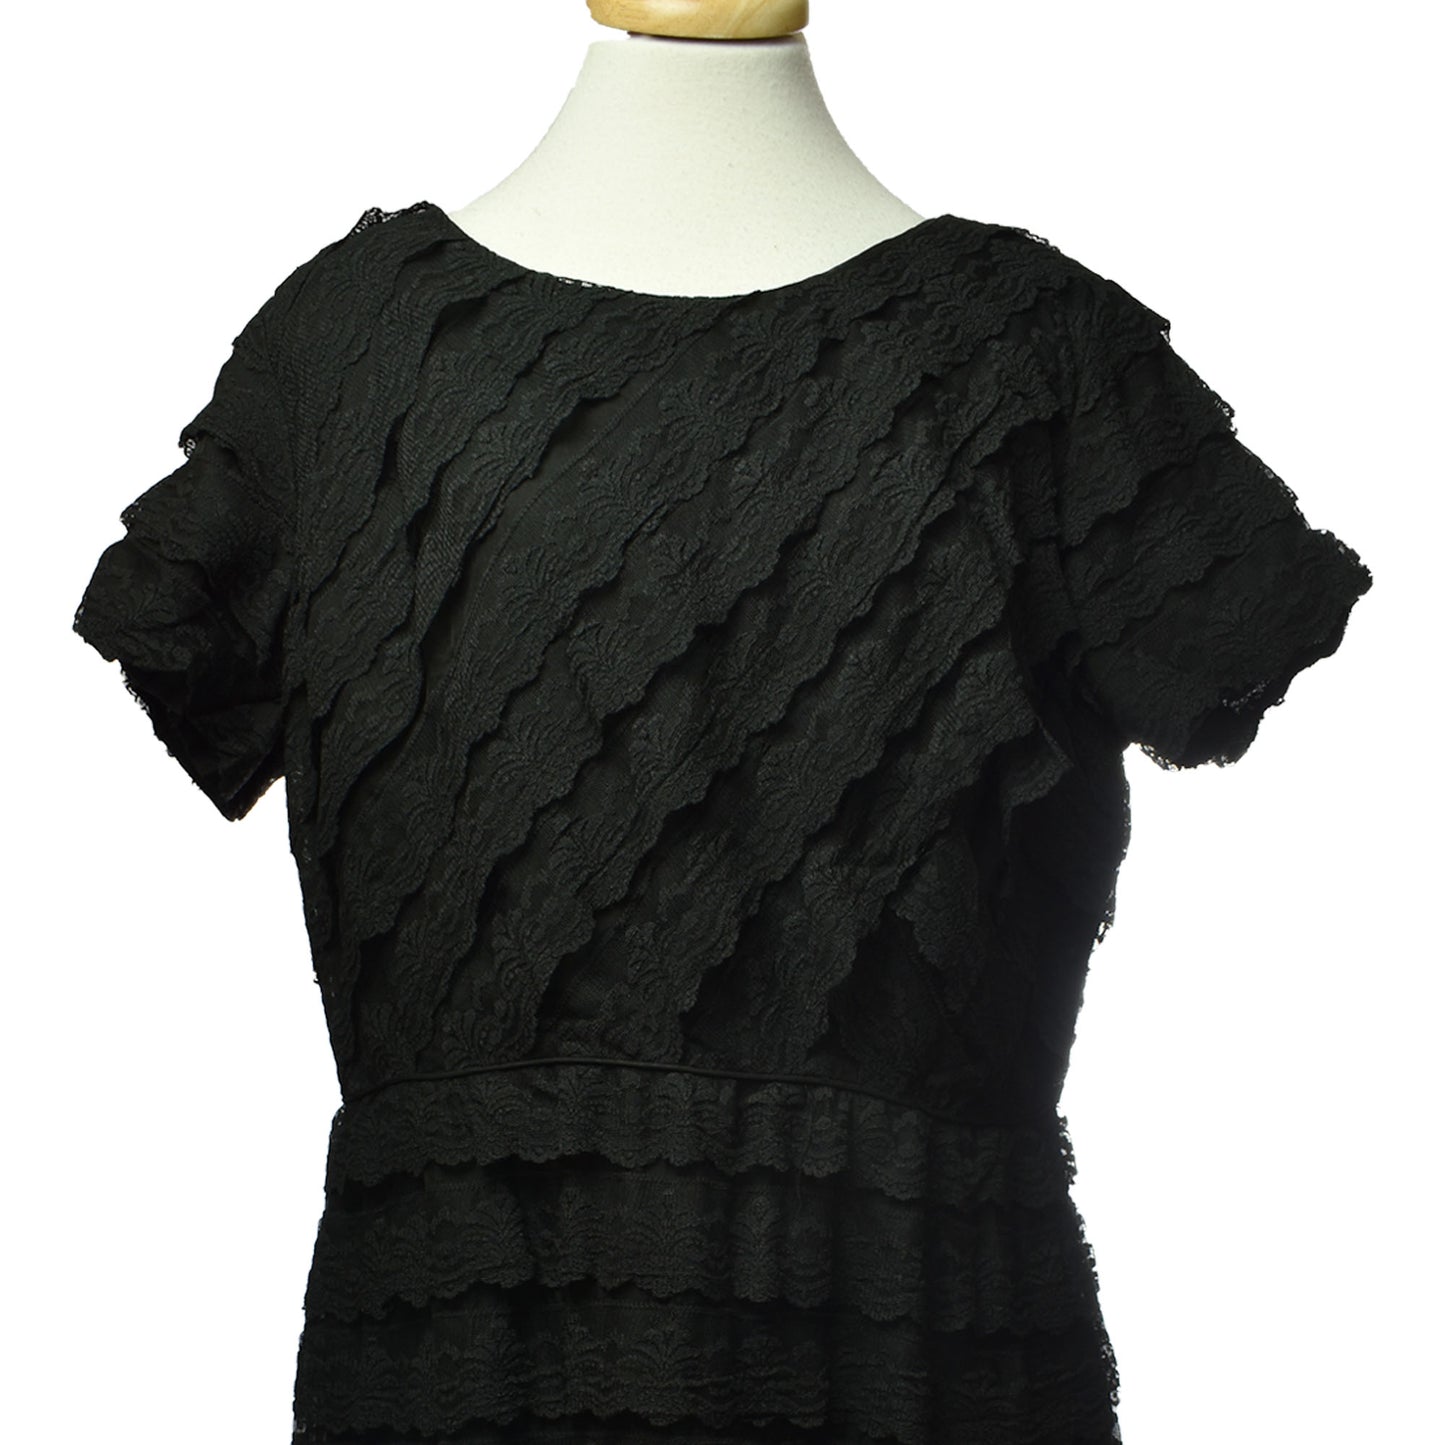 Vintage 40s 50s Slim - Mode by Evelyn Erdell Plus Size Black Layered Lace Cocktail Dress